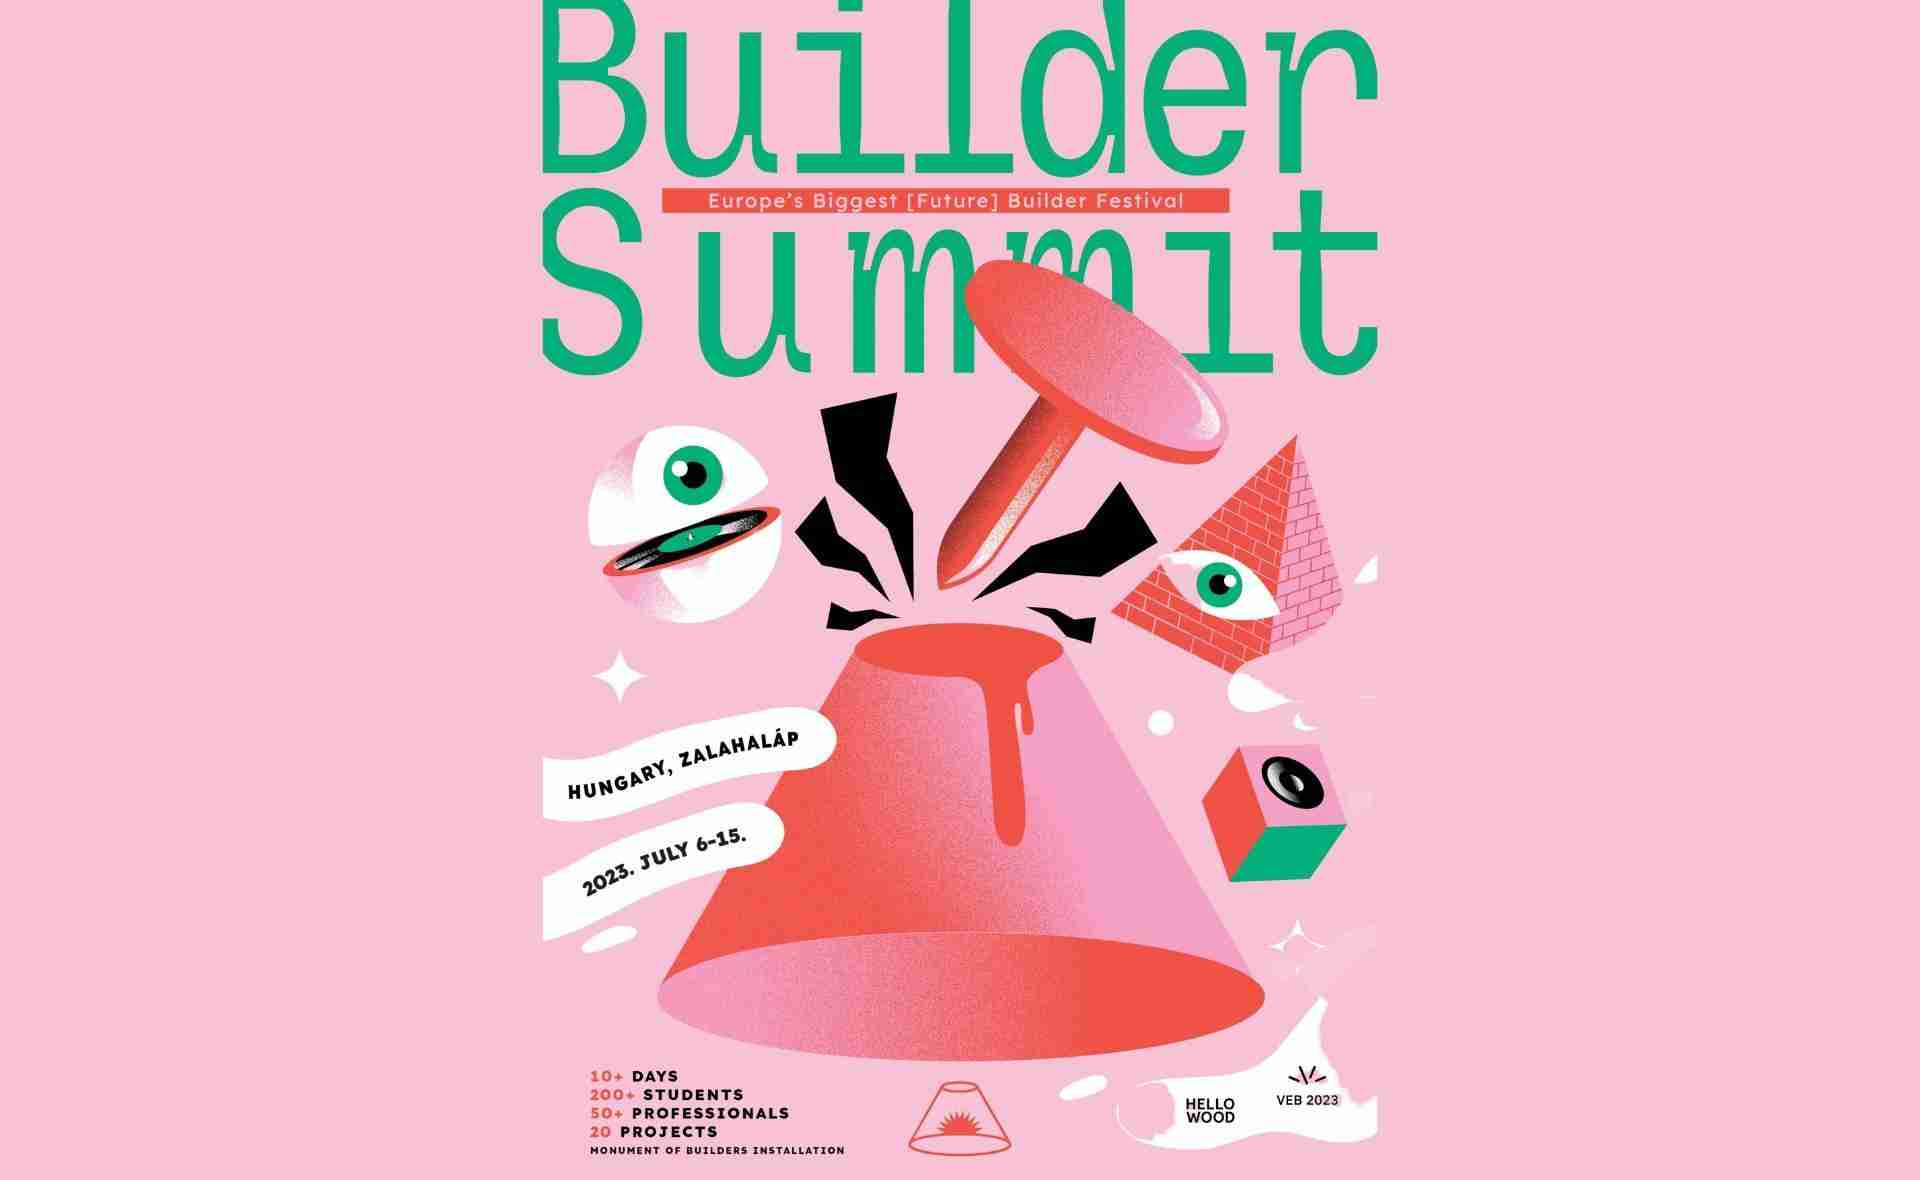 Hello Wood Builder Summit application is now open